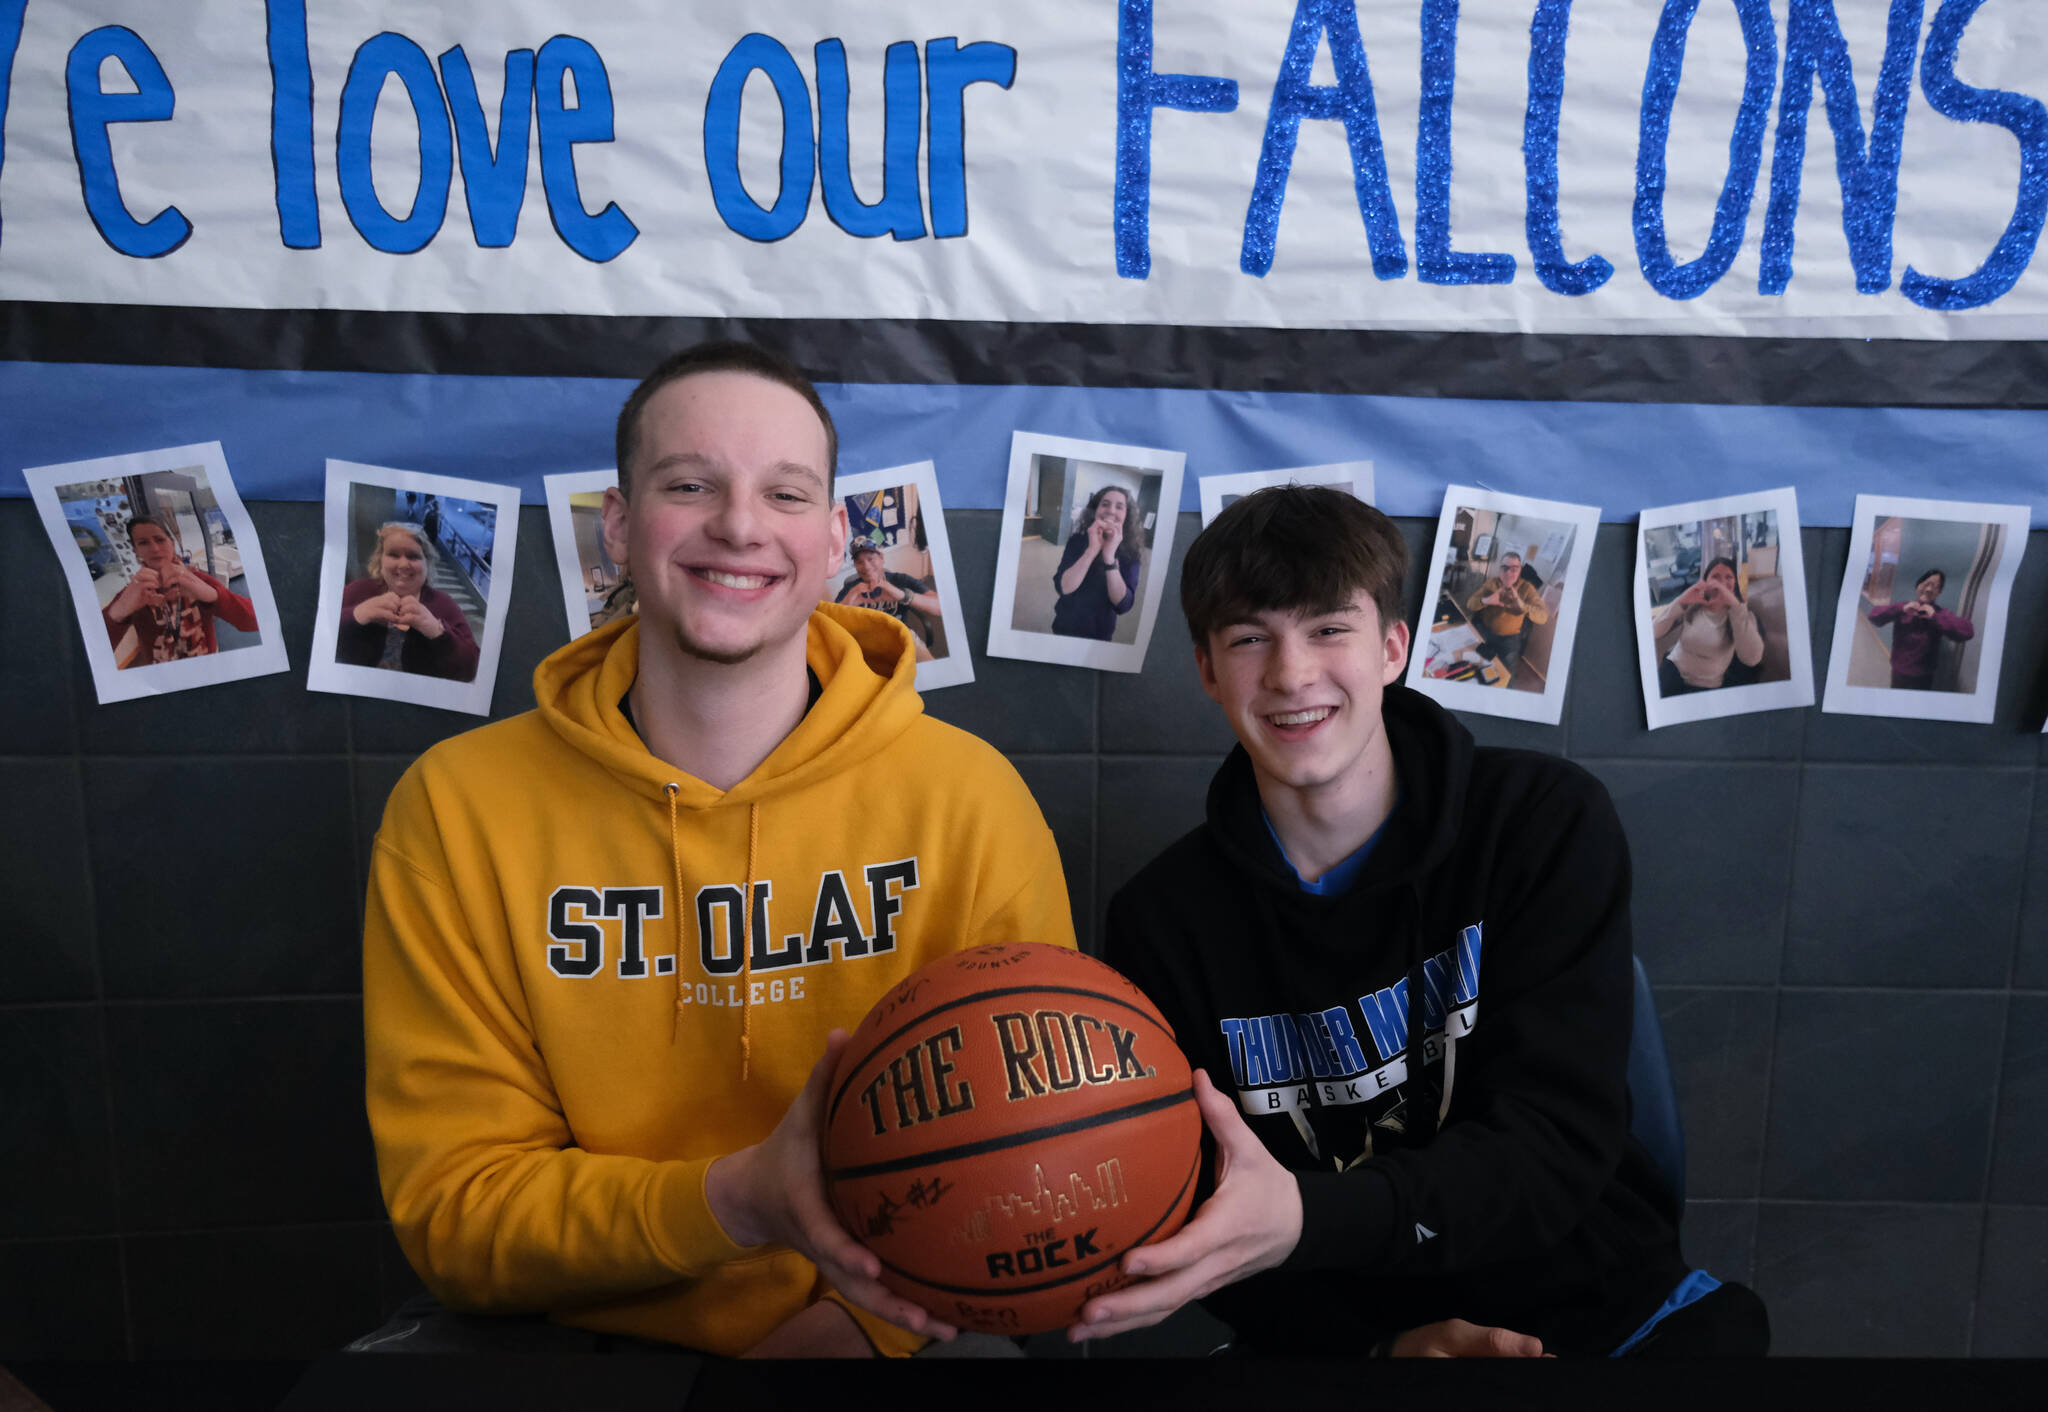 Thunder Mountain High School seniors James Polasky, left, and Samuel Lockhart, right, signed letters of intent on Thursday in the TMHS commons to play college basketball. Polasky will attend St. Olaf in Minnesota and Lockhart will attend Edmonds College in Washington state. (Klas Stolpe / For the Juneau Empire)